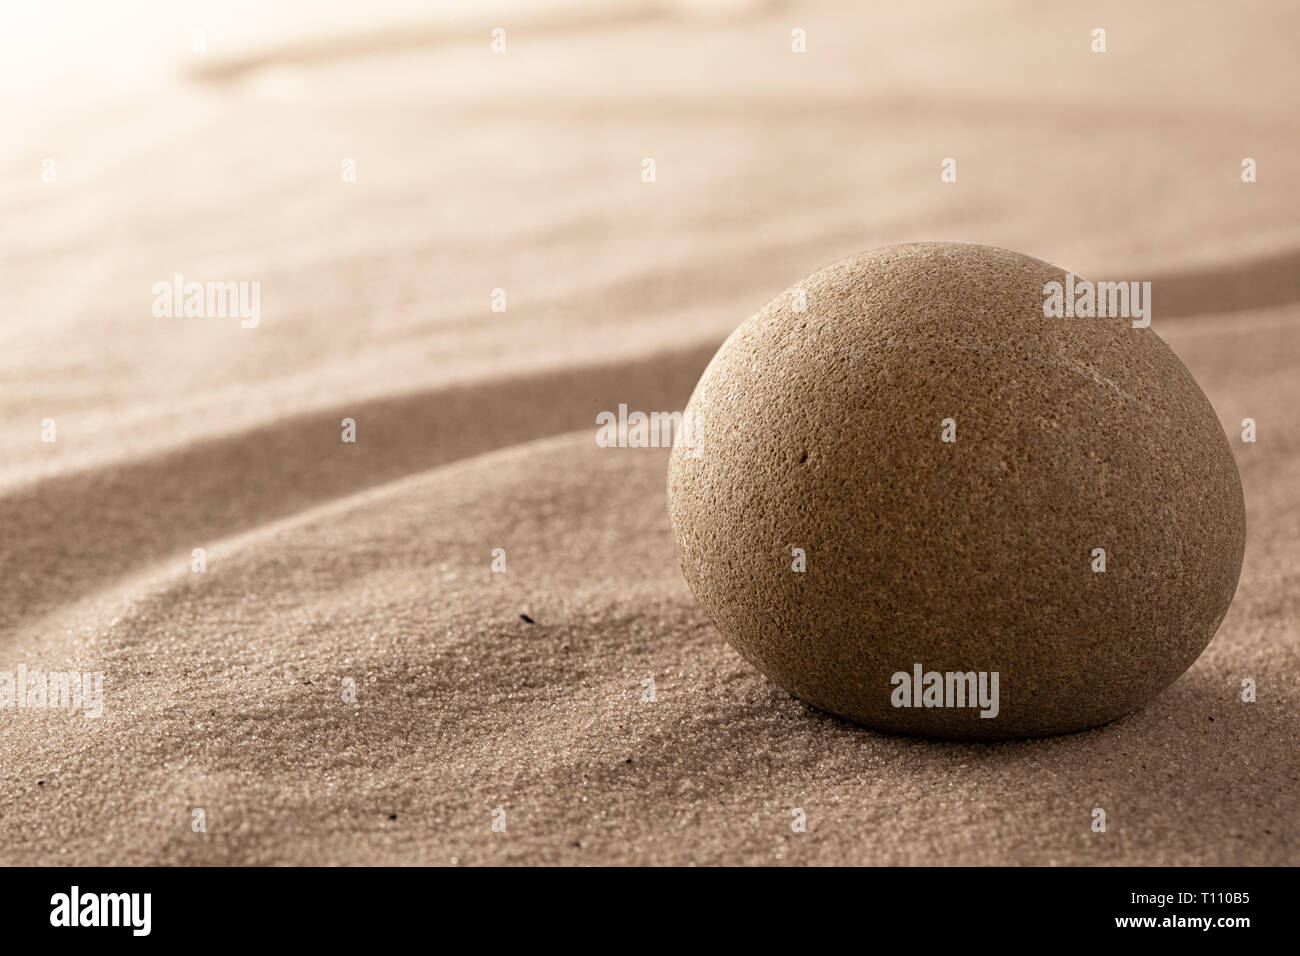 zen stone and sand garden. Concept for relaxation meditation purity spirituality and balance. Rock and lines spa wellness background Stock Photo